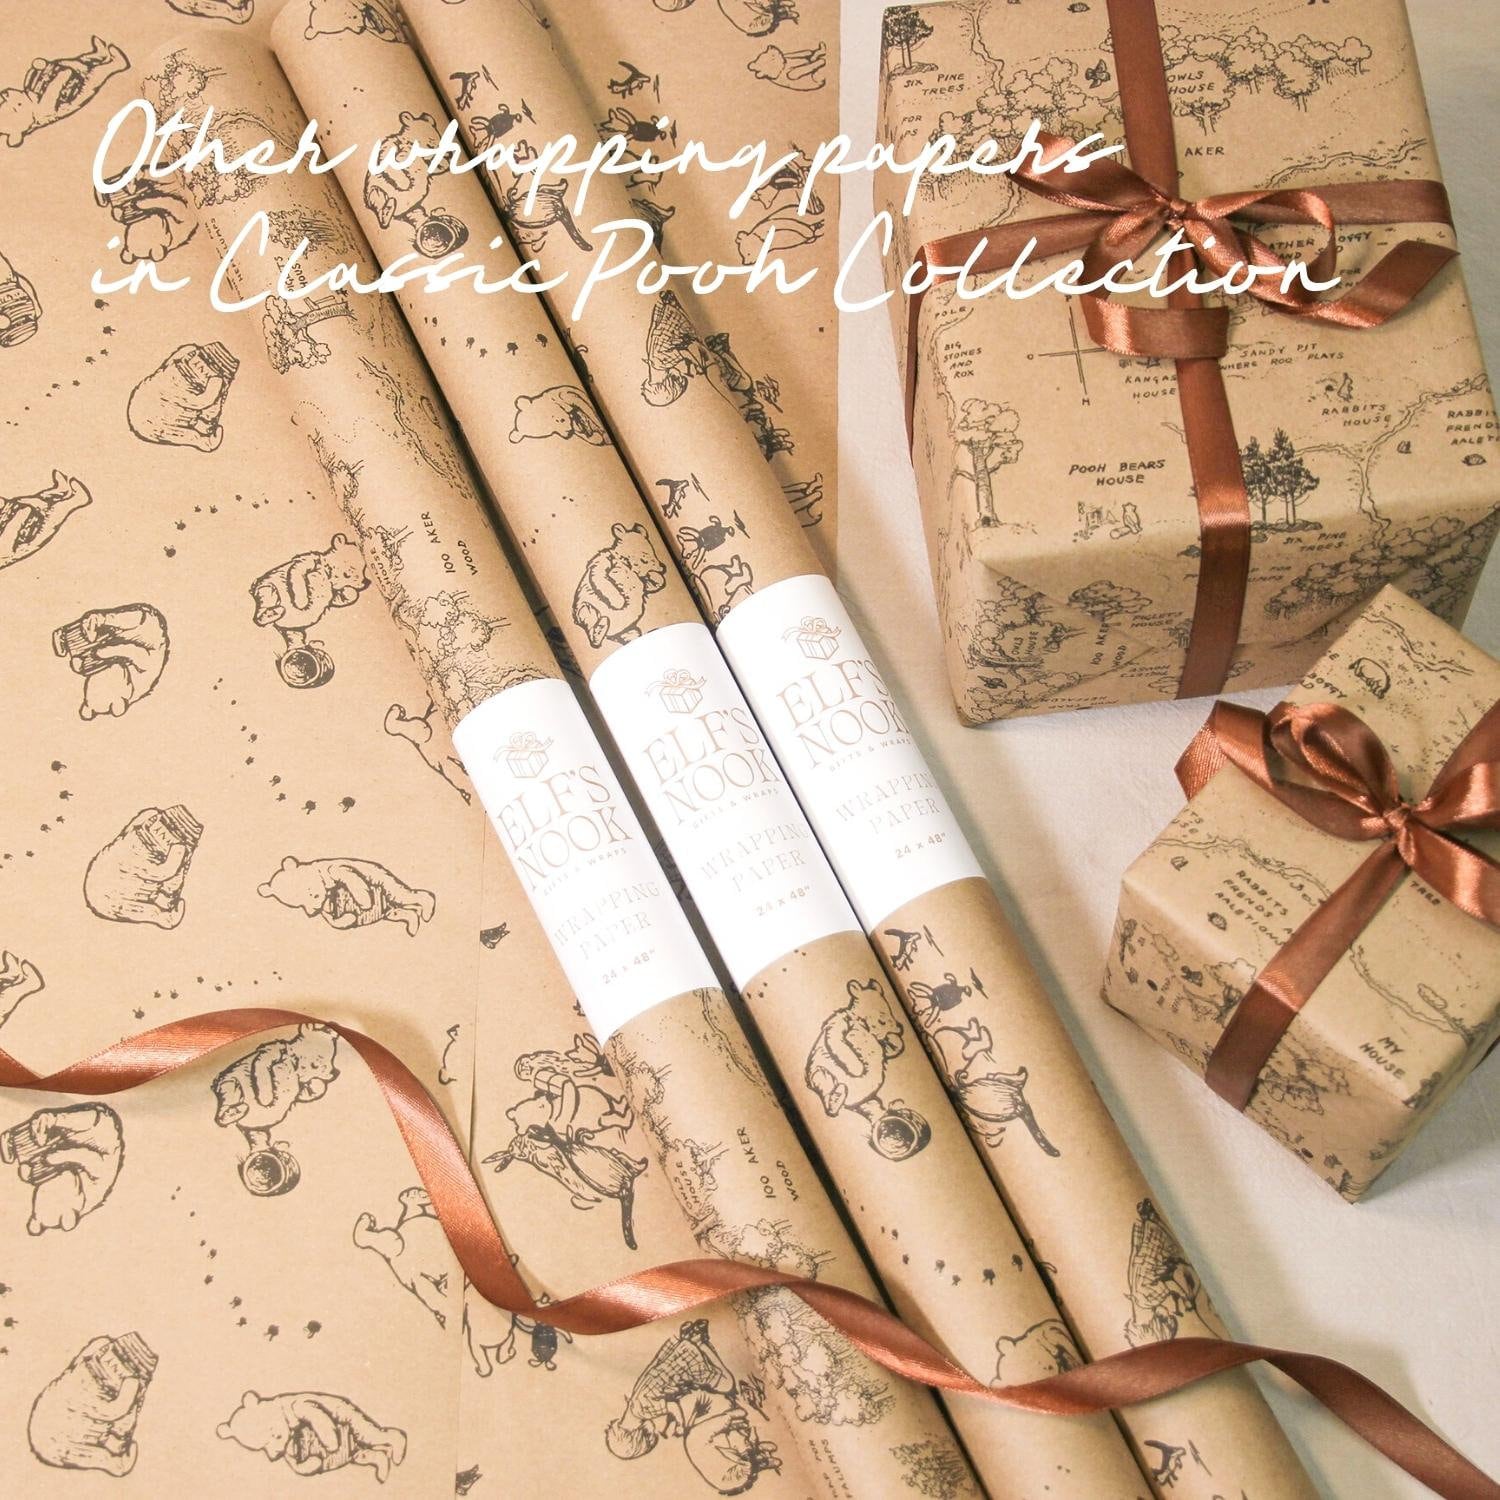 winnie the pooh wrapping paper｜TikTok Search